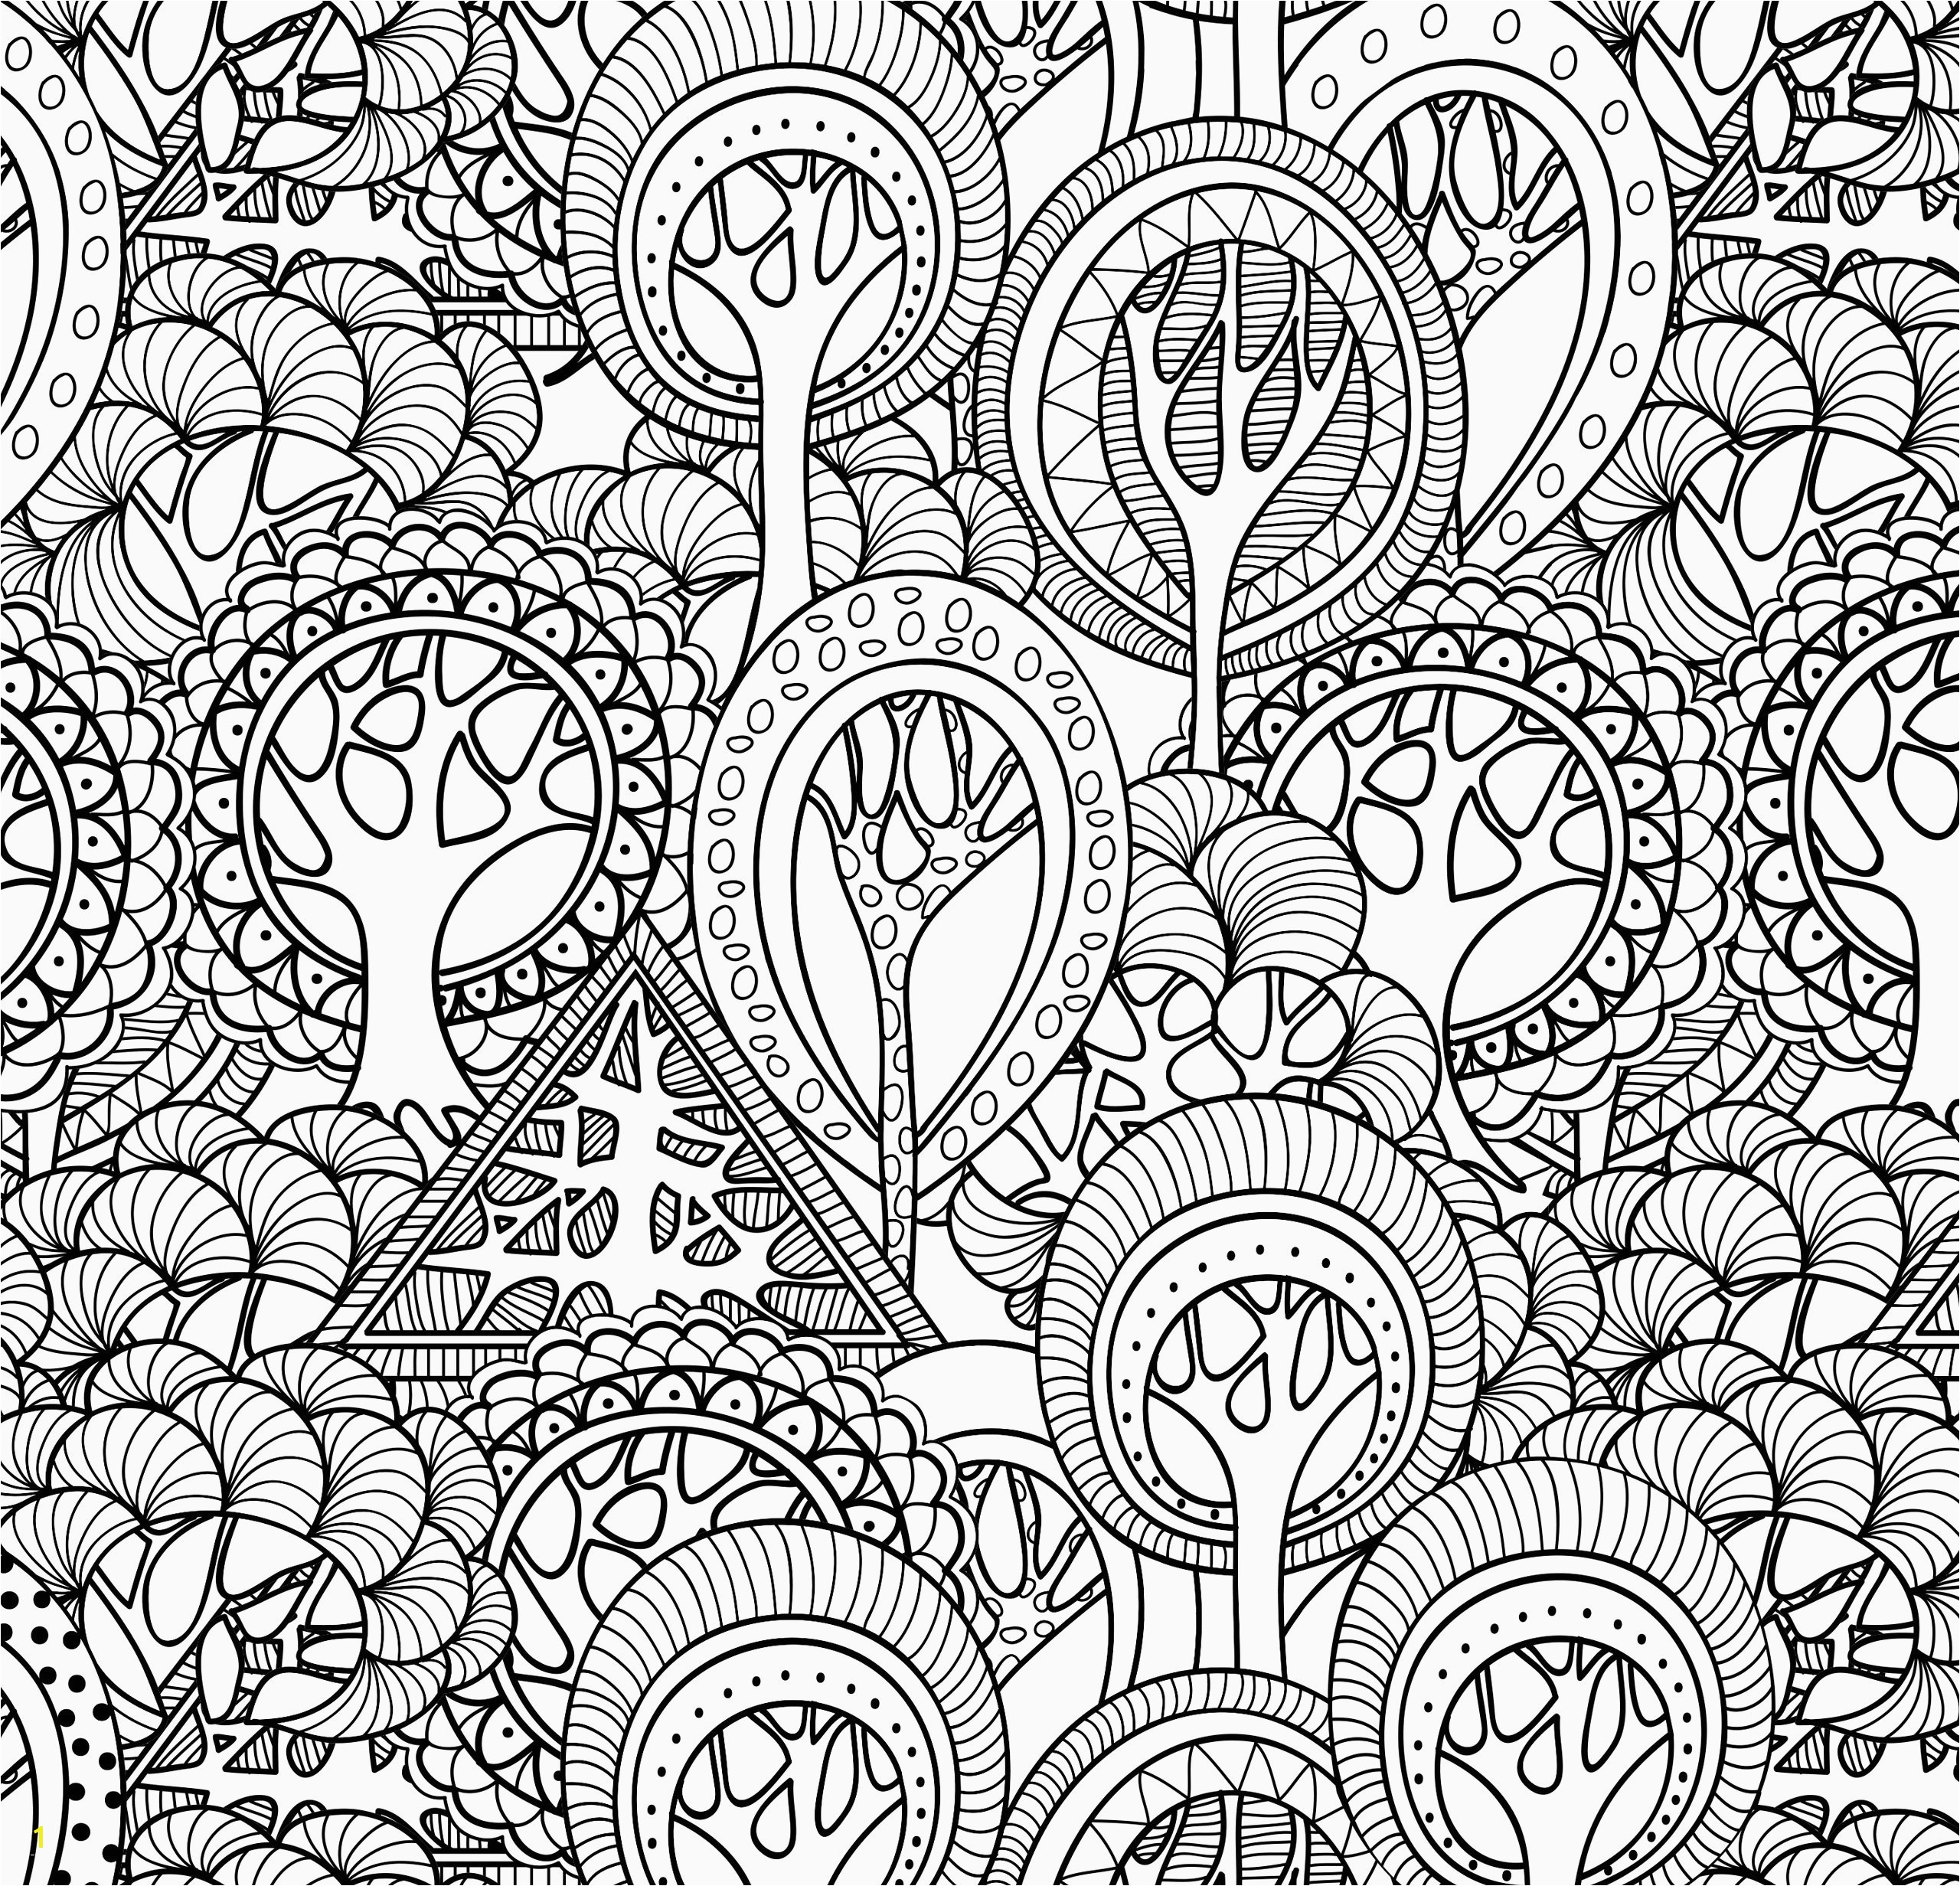 Thank You Coloring Pages Free Crayola Coloring Pages Thank You Coloring Pages Luxury Cool Coloring